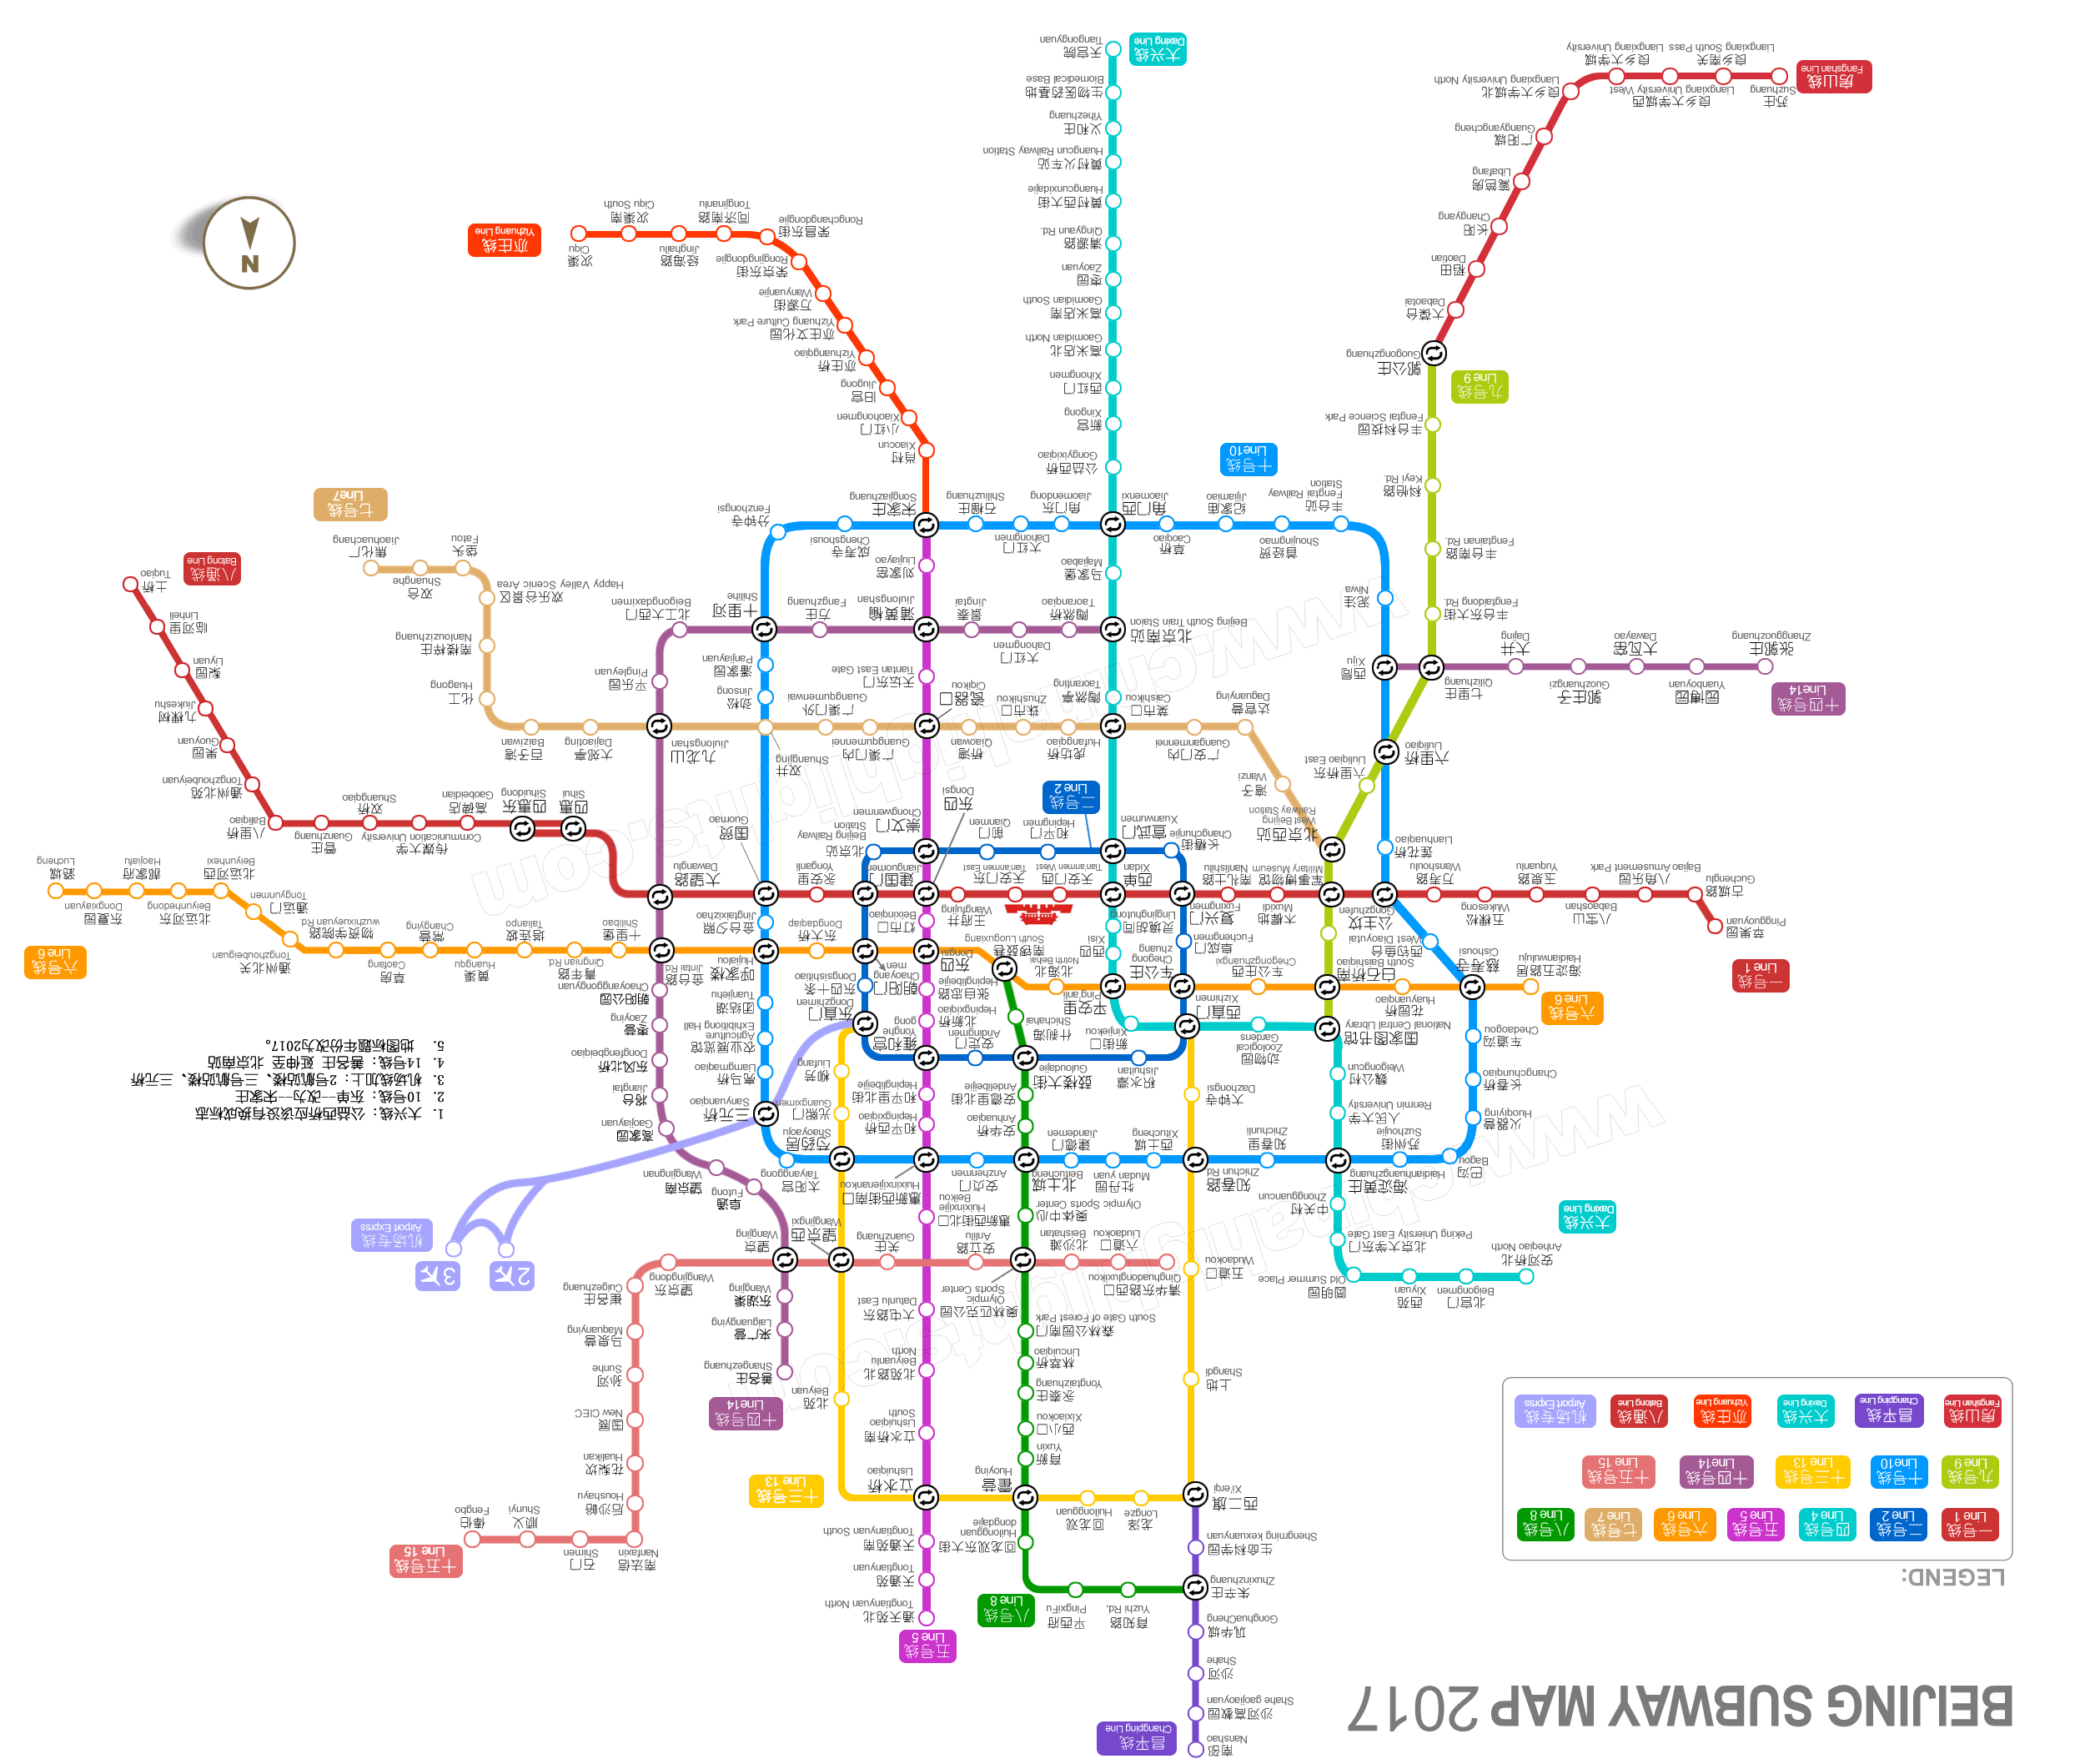 Beijing Subway Map 2017, Latest Maps of Beijing Subway and Stations